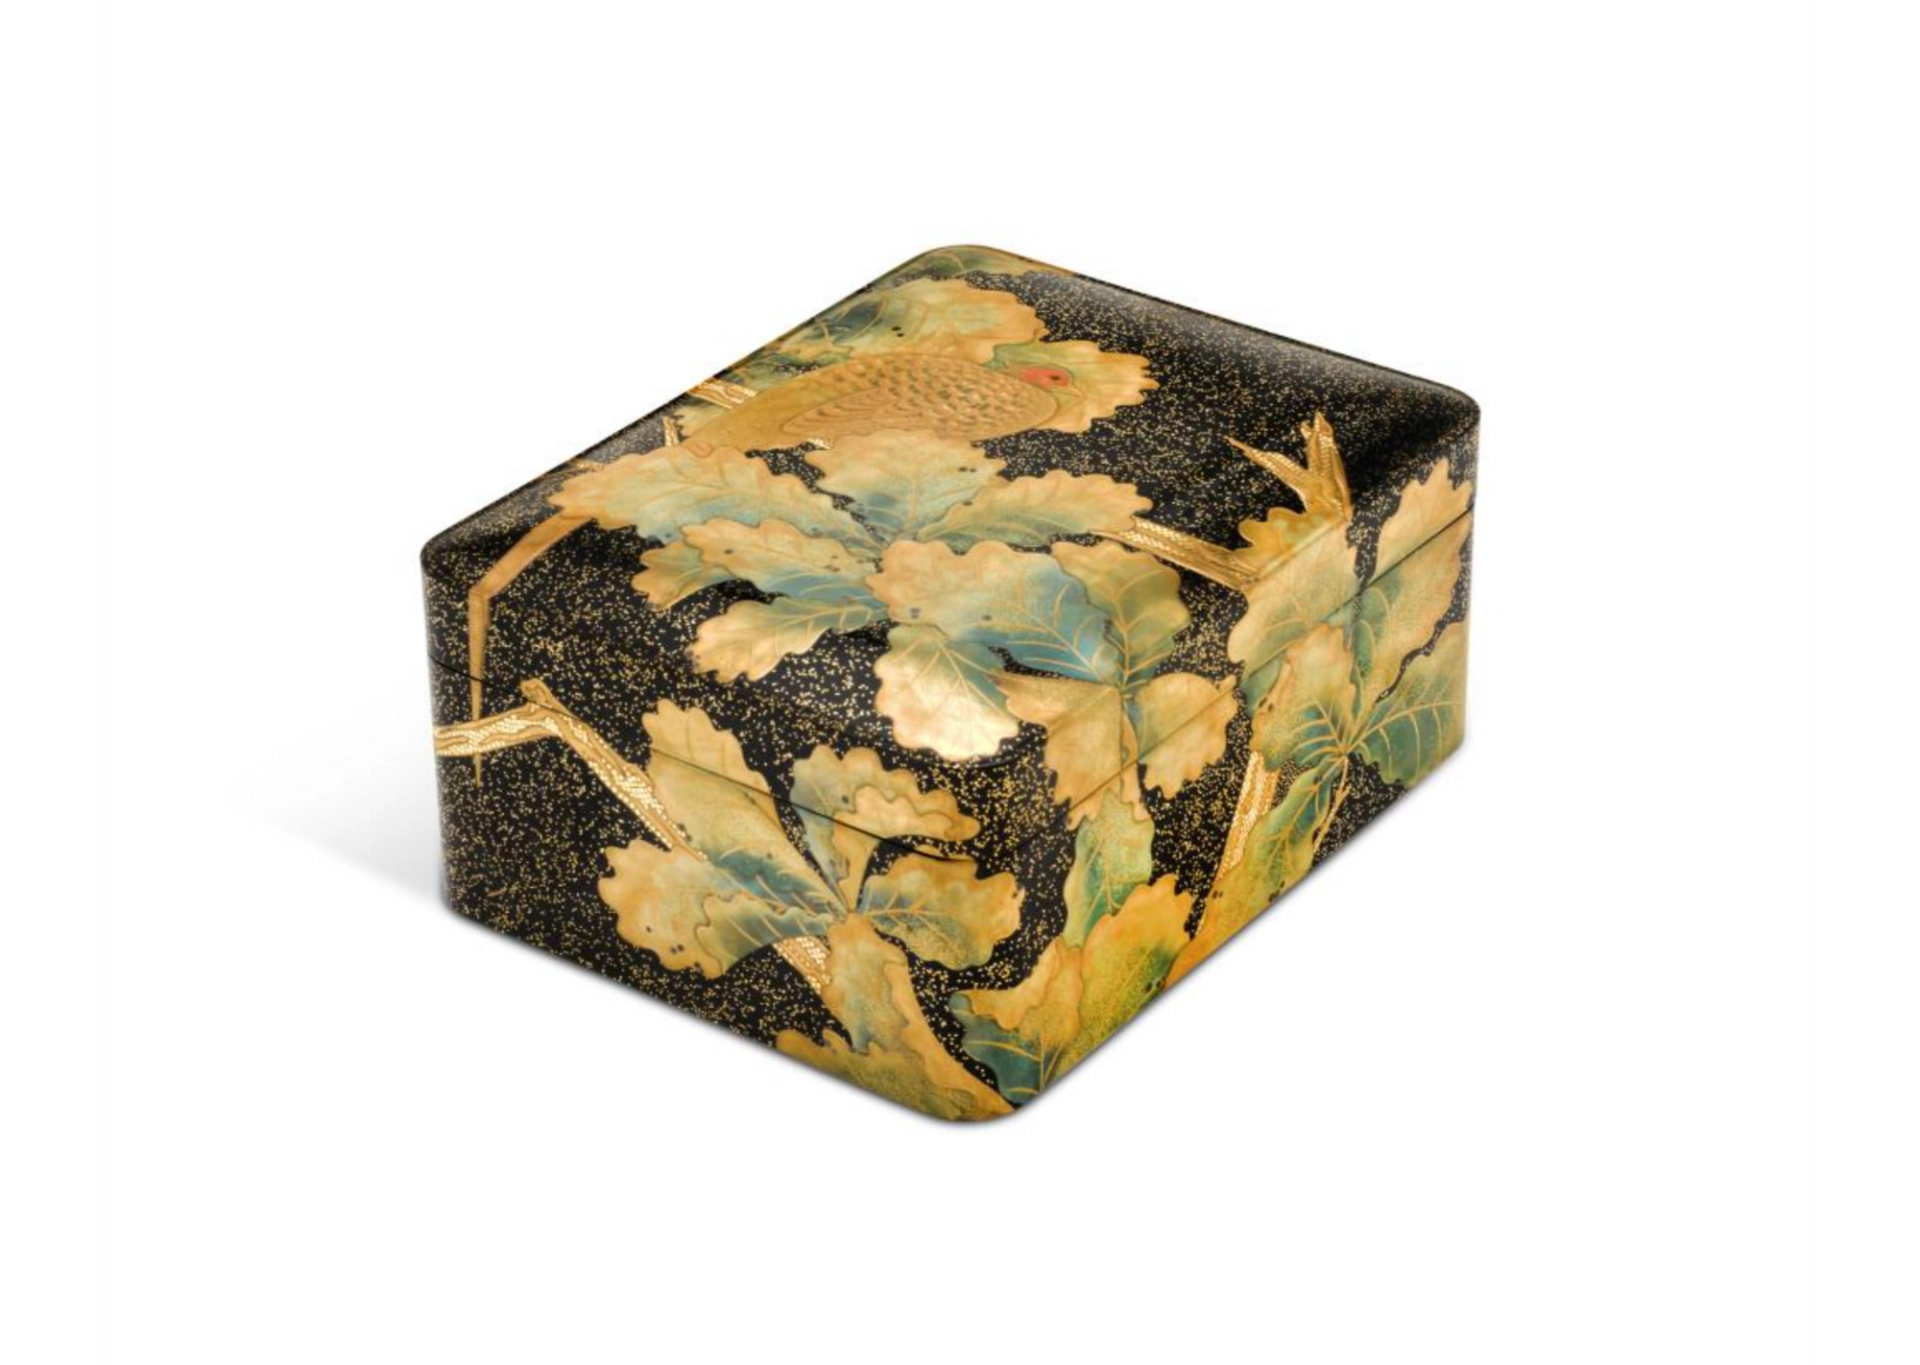 A rounded rectangular box with close-fitting cover, decorated in gold, silver, red and green. Inlays of gold foil on a black lacquer ground with hirame, with a pheasant in the branches of an oak tree.